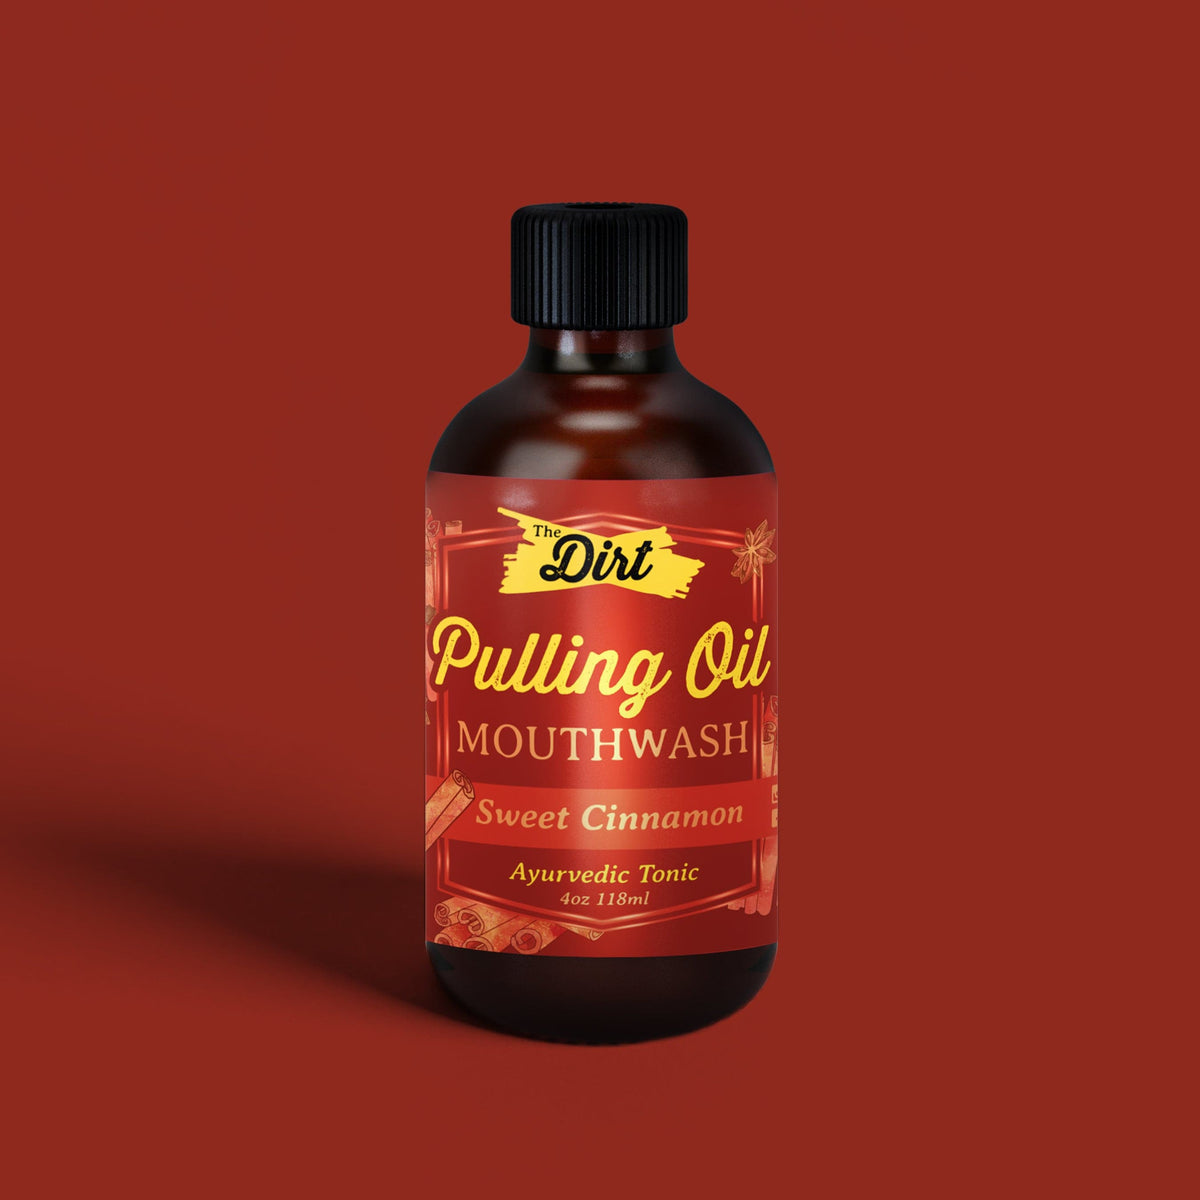 Oil Pulling Mouthwash - The Dirt - Super Natural Personal Care 4oz / Sweet Cinnamon Oral Care